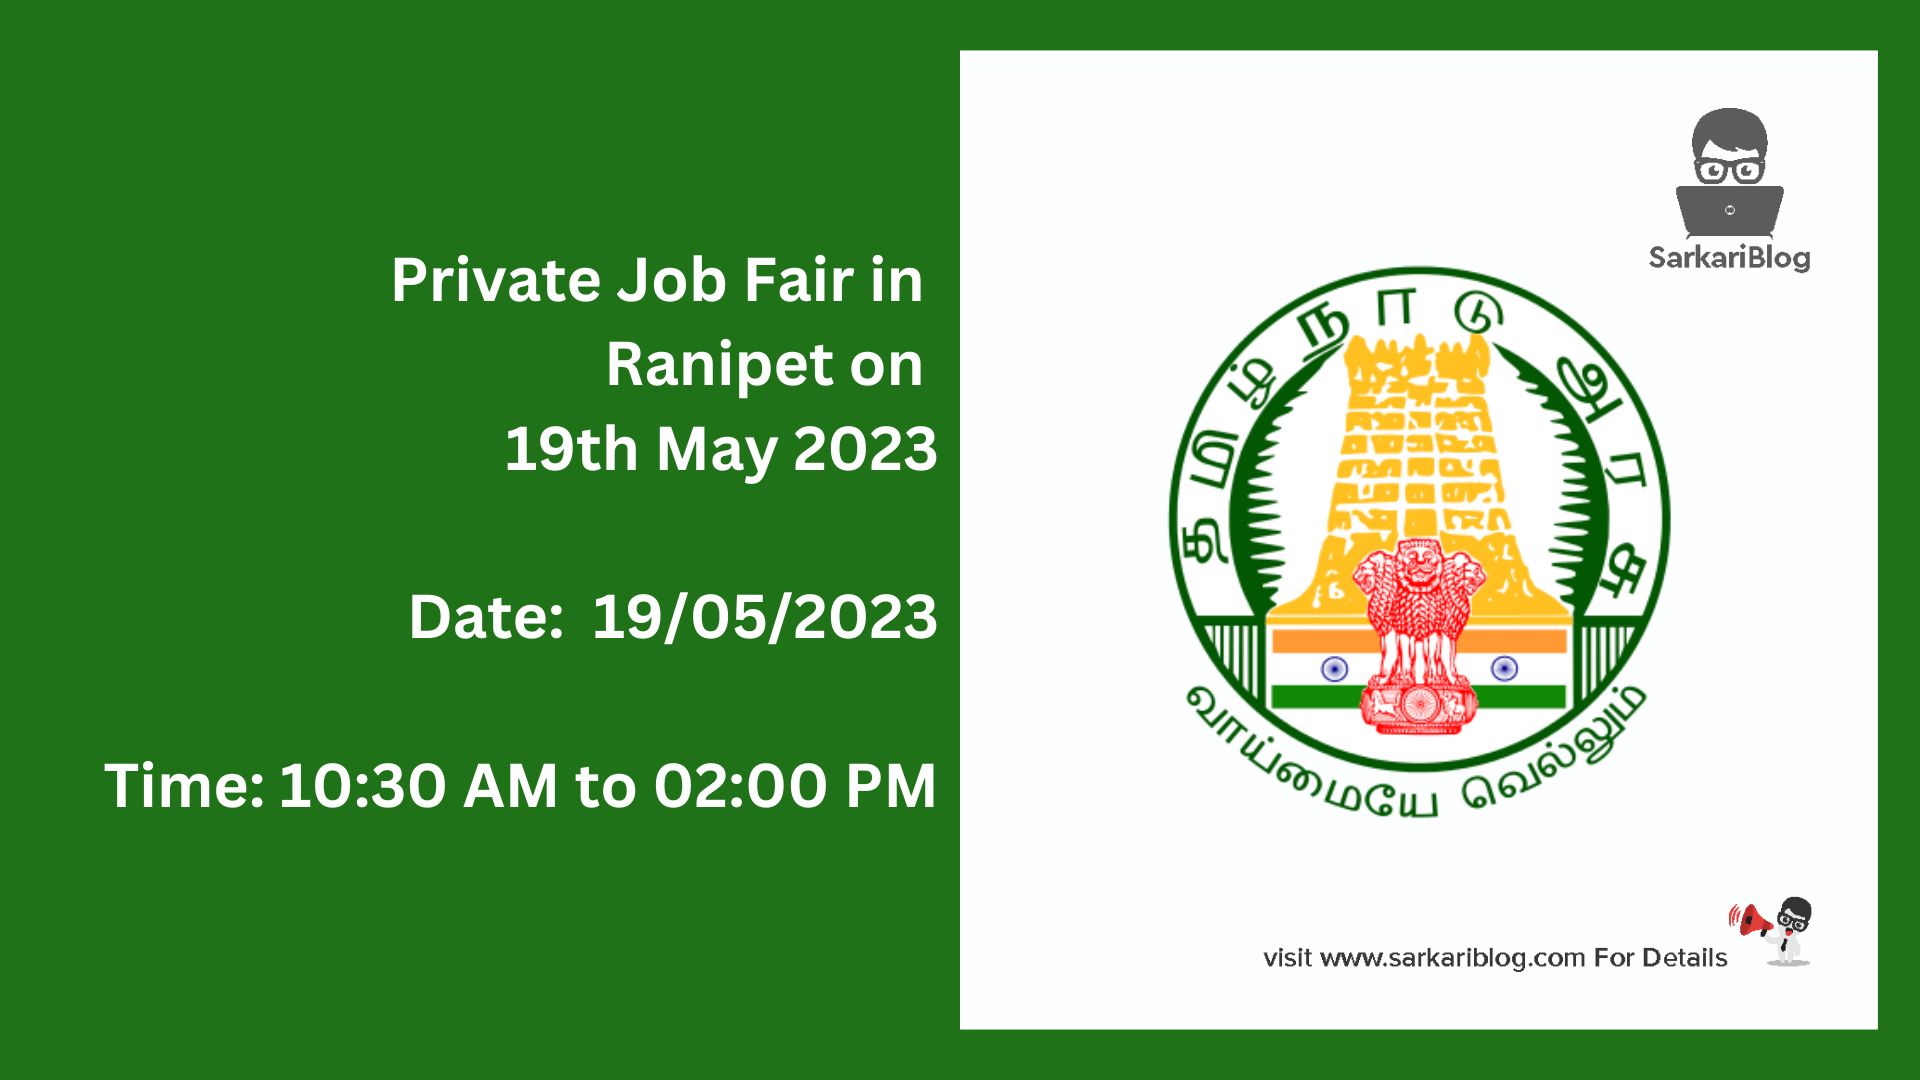 Private Job Fair in Ranipet on 19th May 2023